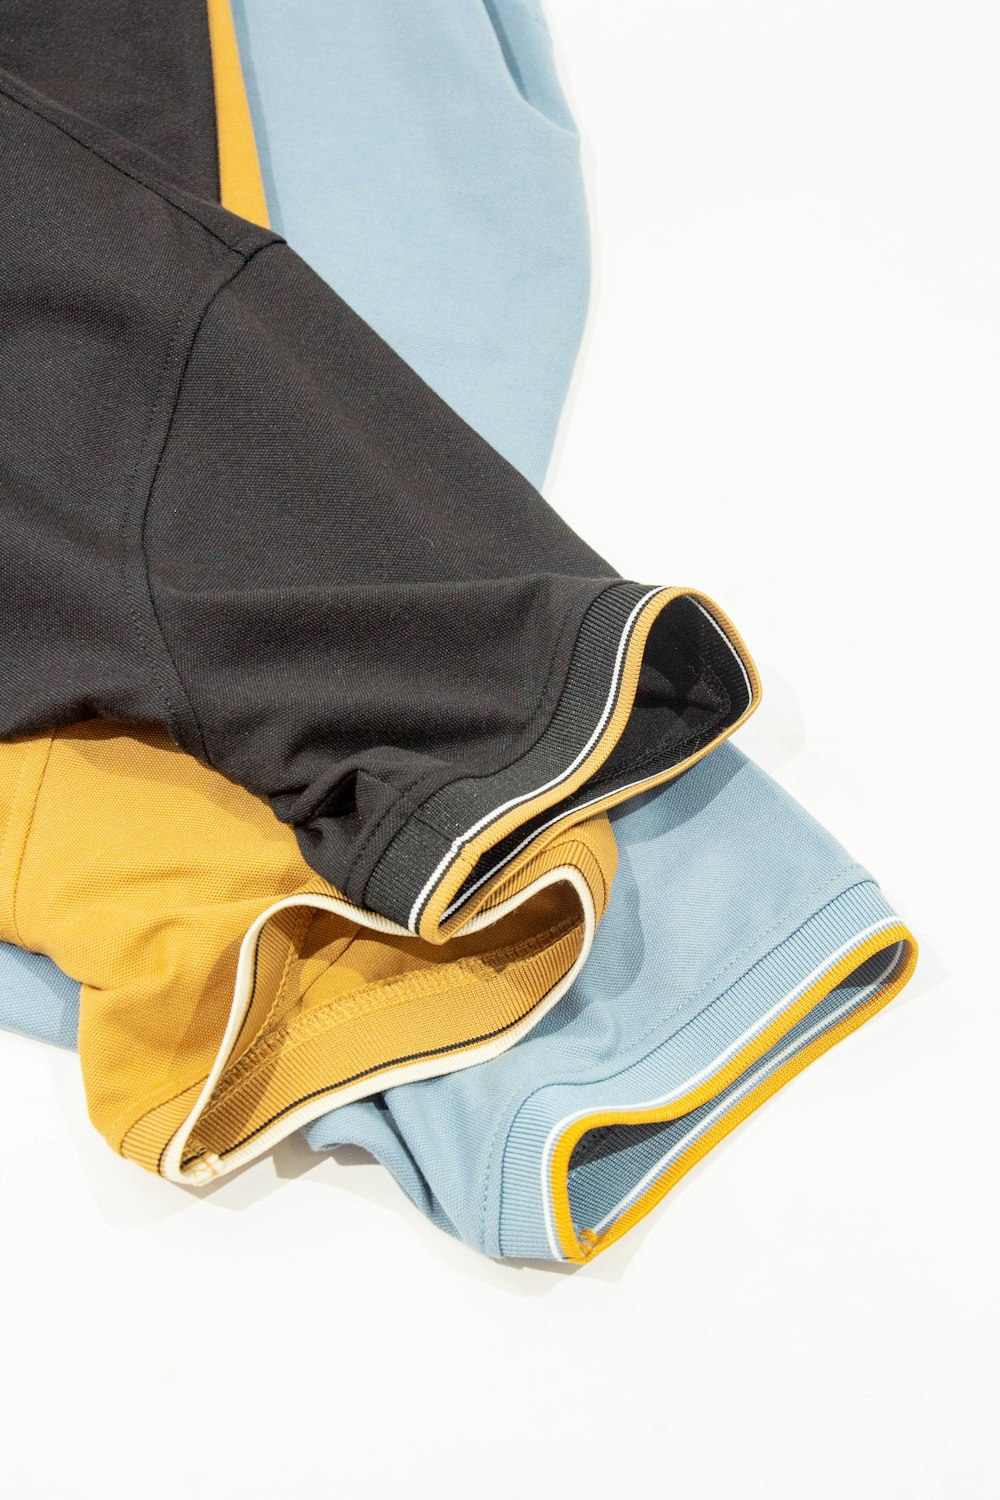 a pair of blue and yellow pants laying on top of each other